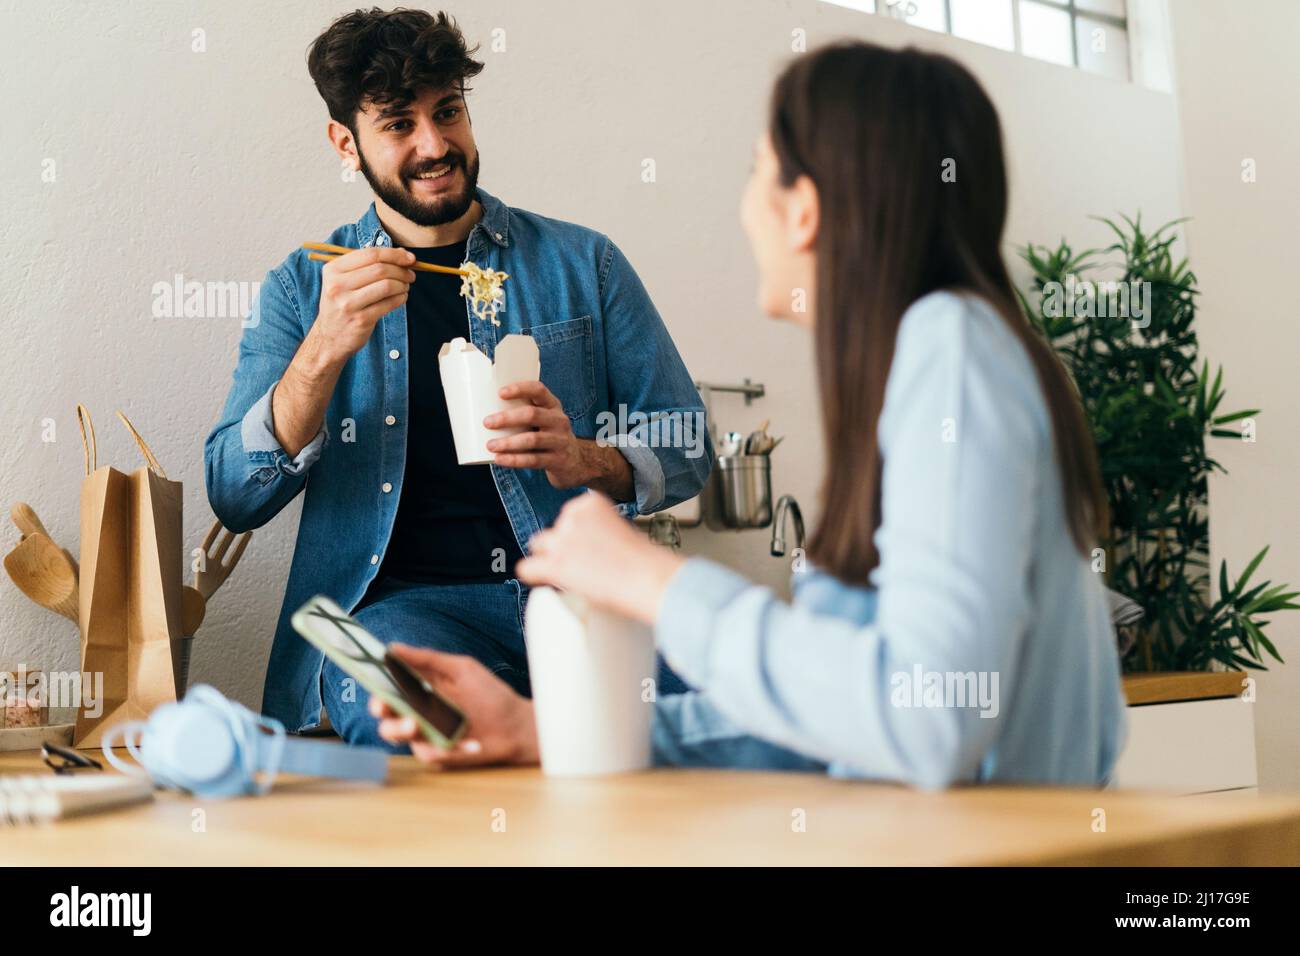 Man eating noodles spending leisure time with girlfriend at home Stock Photo